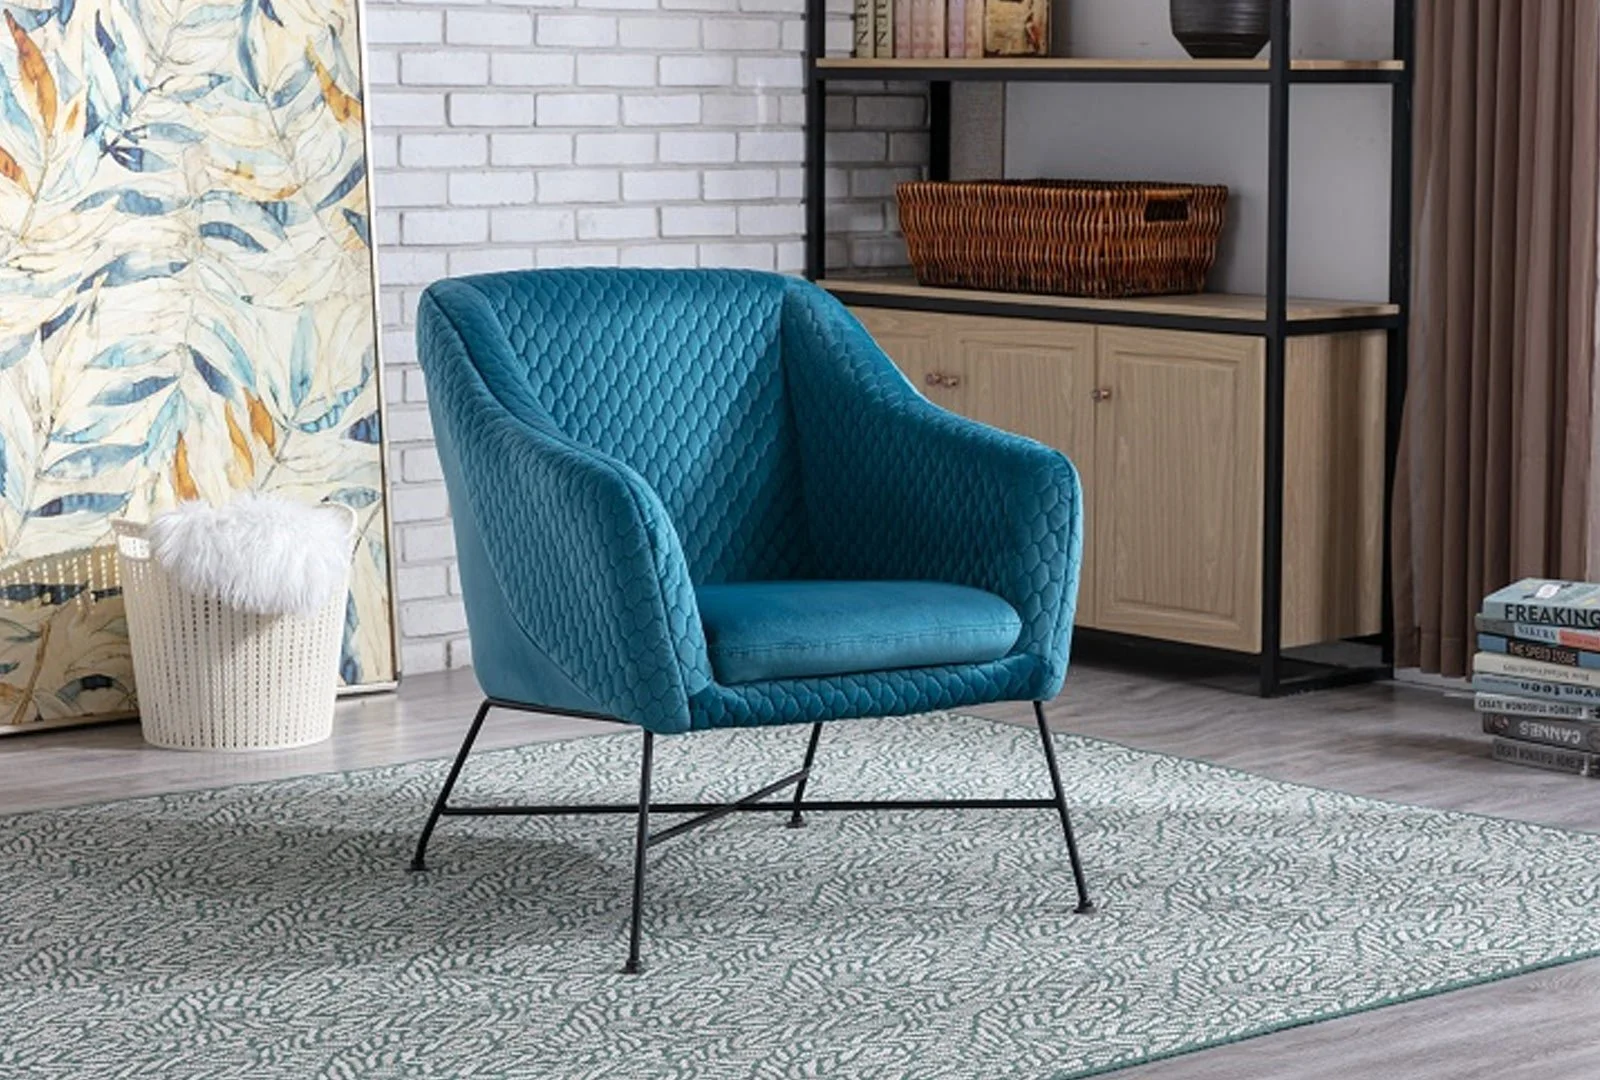 Comfortable accent chair in a modern design